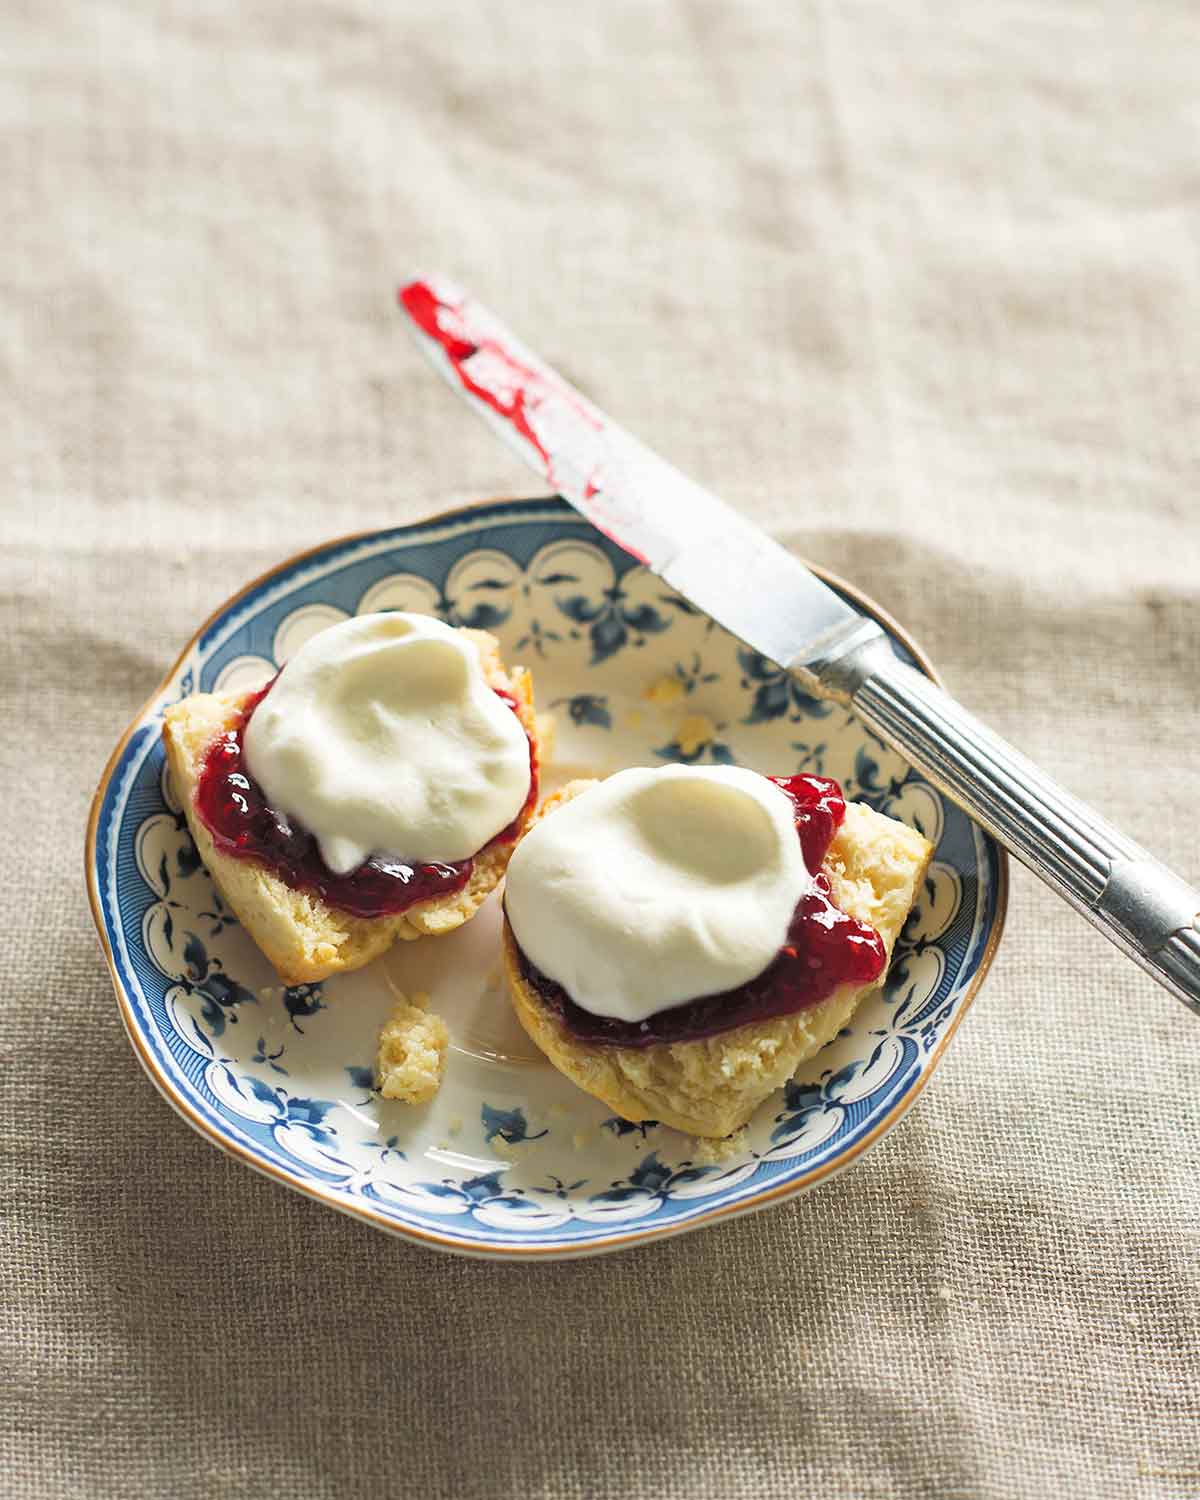 A blue and white saucer with a knife and 2 halves of a cream scone, topped with jam and whipped cream.